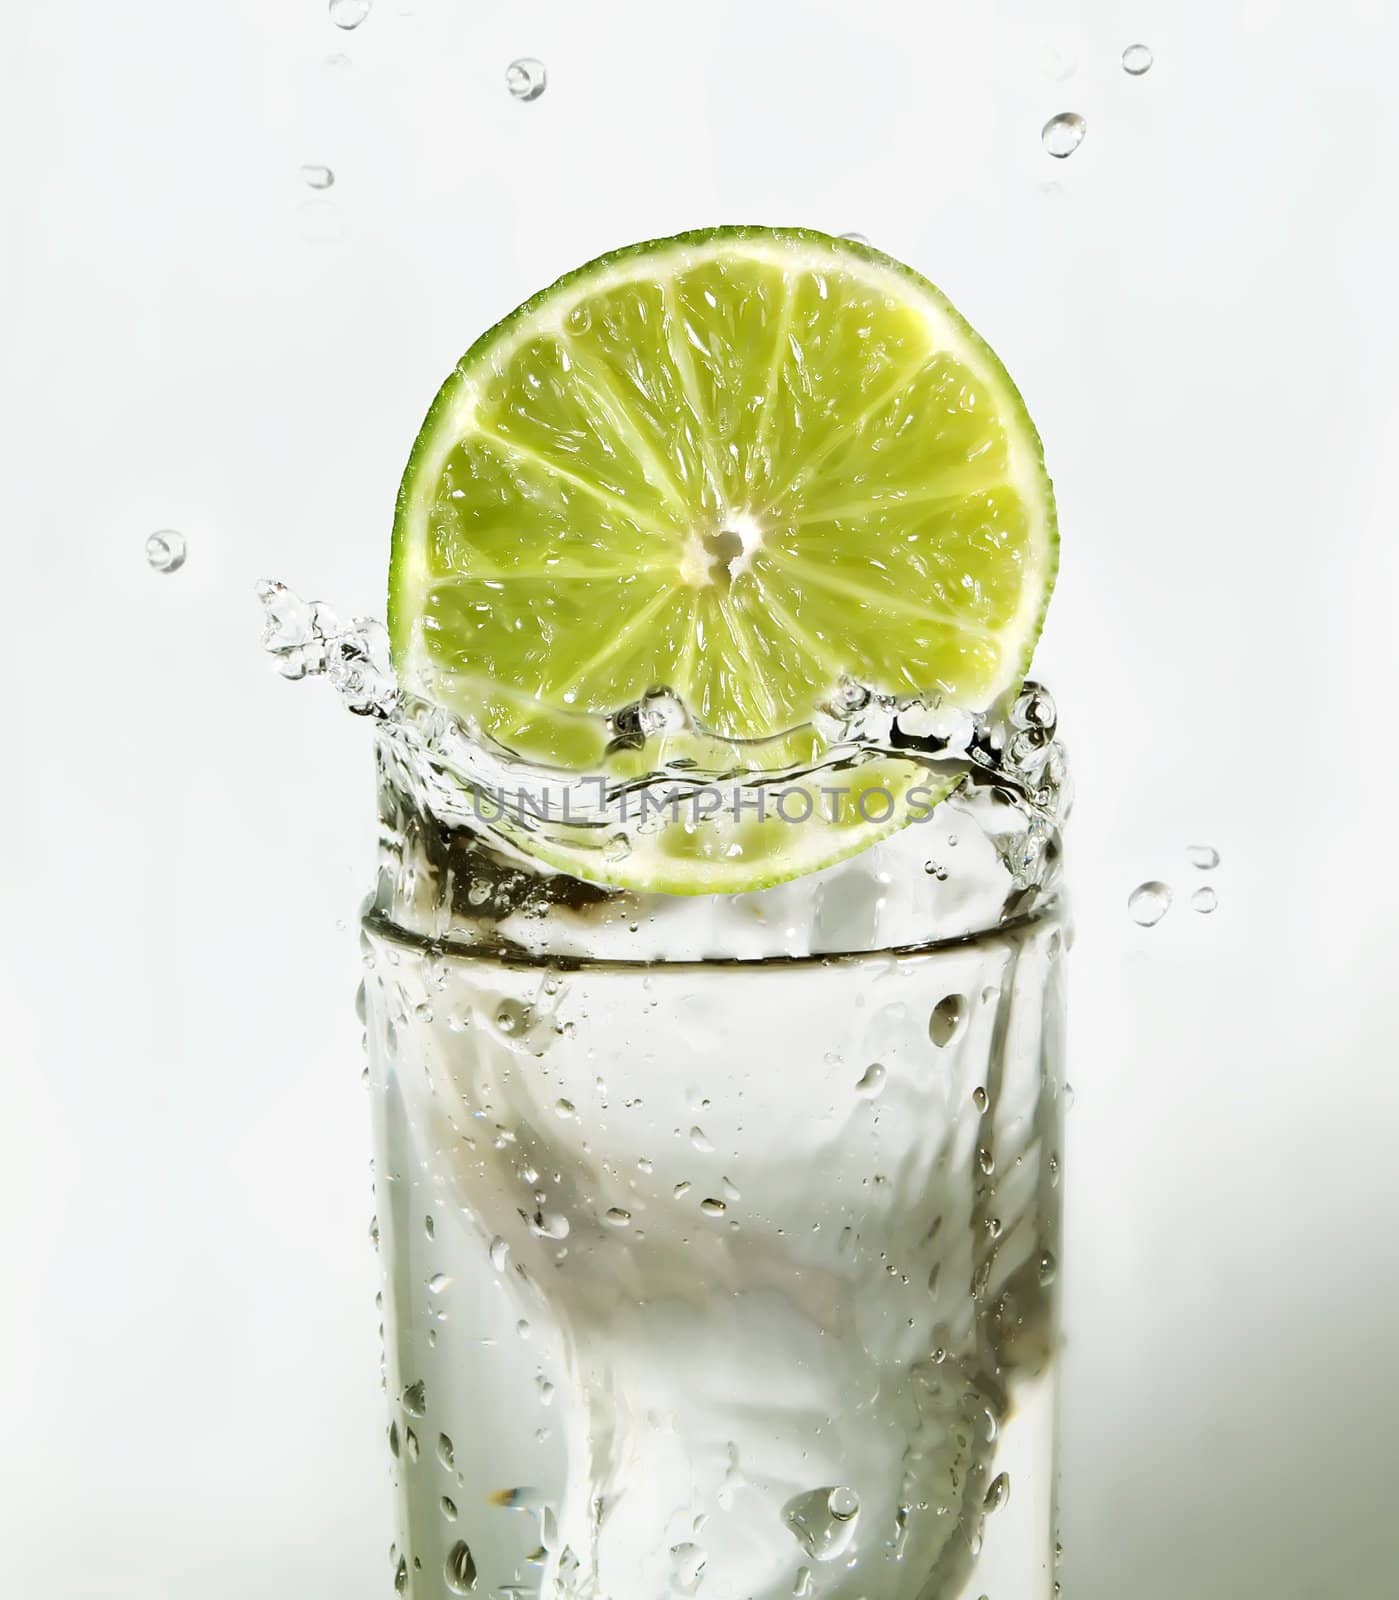 Lime slice in water by henrischmit